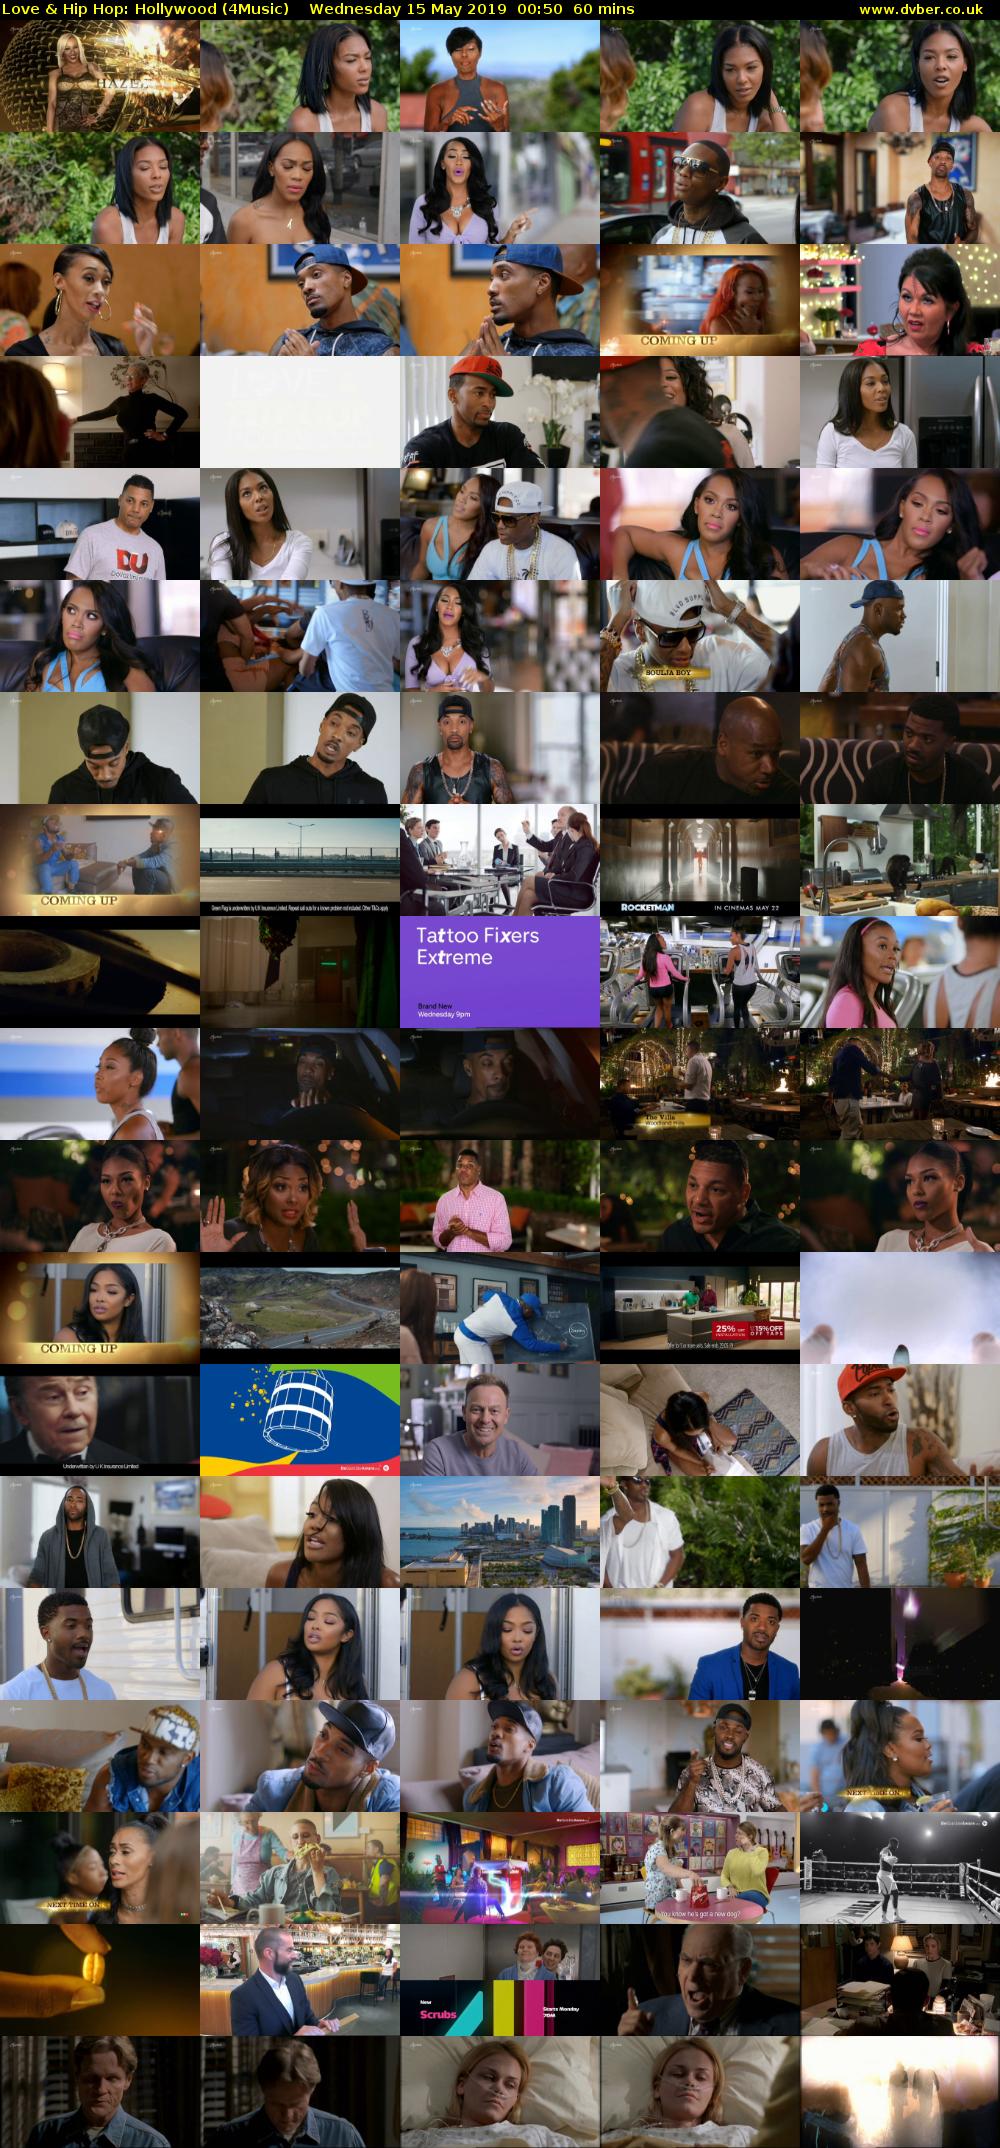 Love & Hip Hop: Hollywood (4Music) Wednesday 15 May 2019 00:50 - 01:50